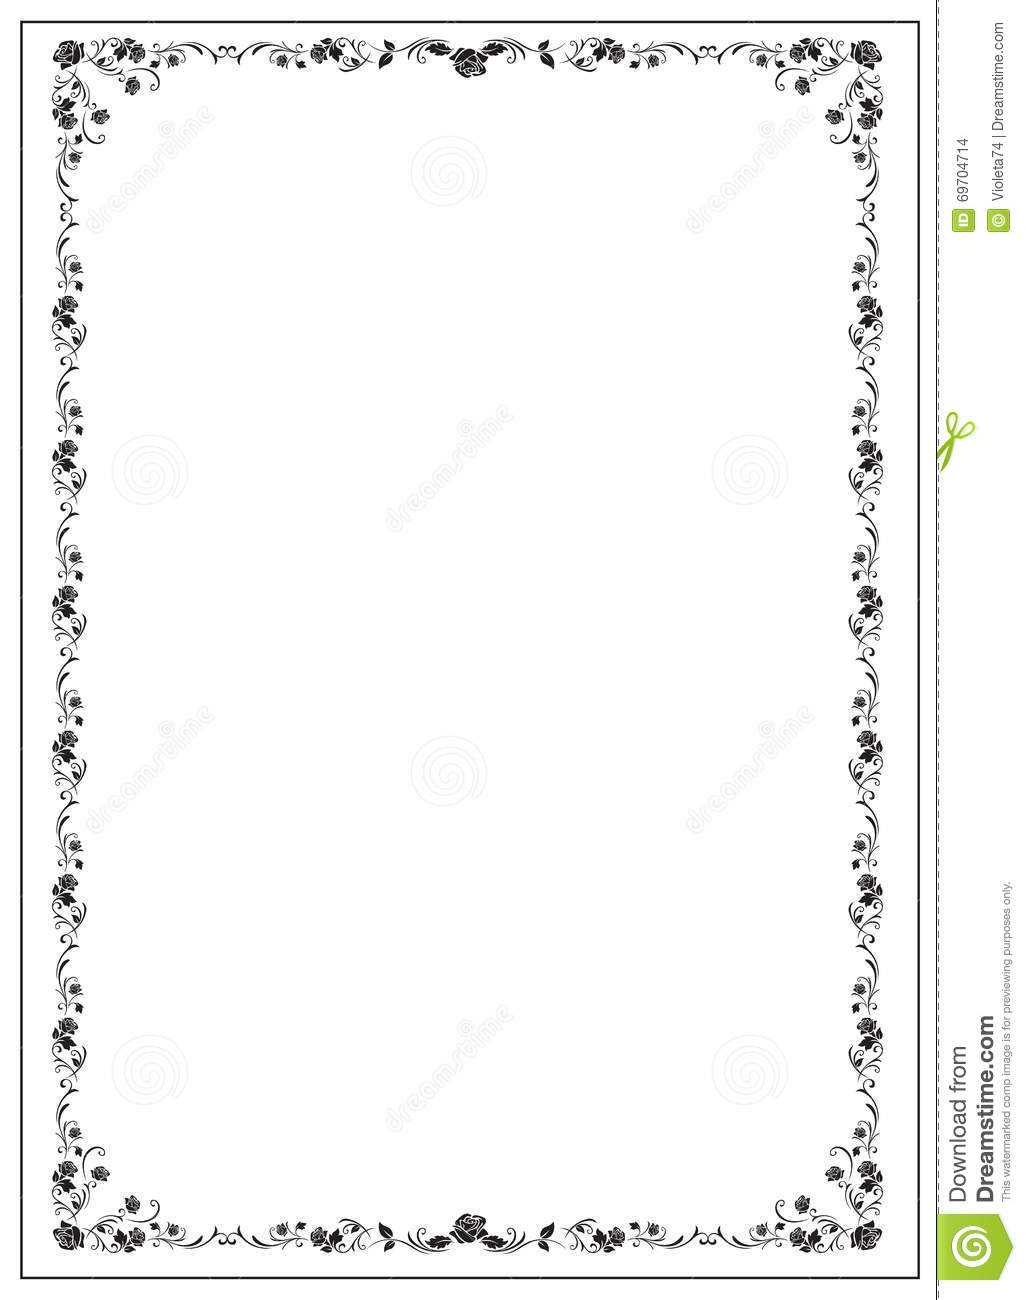 Certificate Template With Floral Rose Elements. Stock Vector For Certificate Border Design Templates